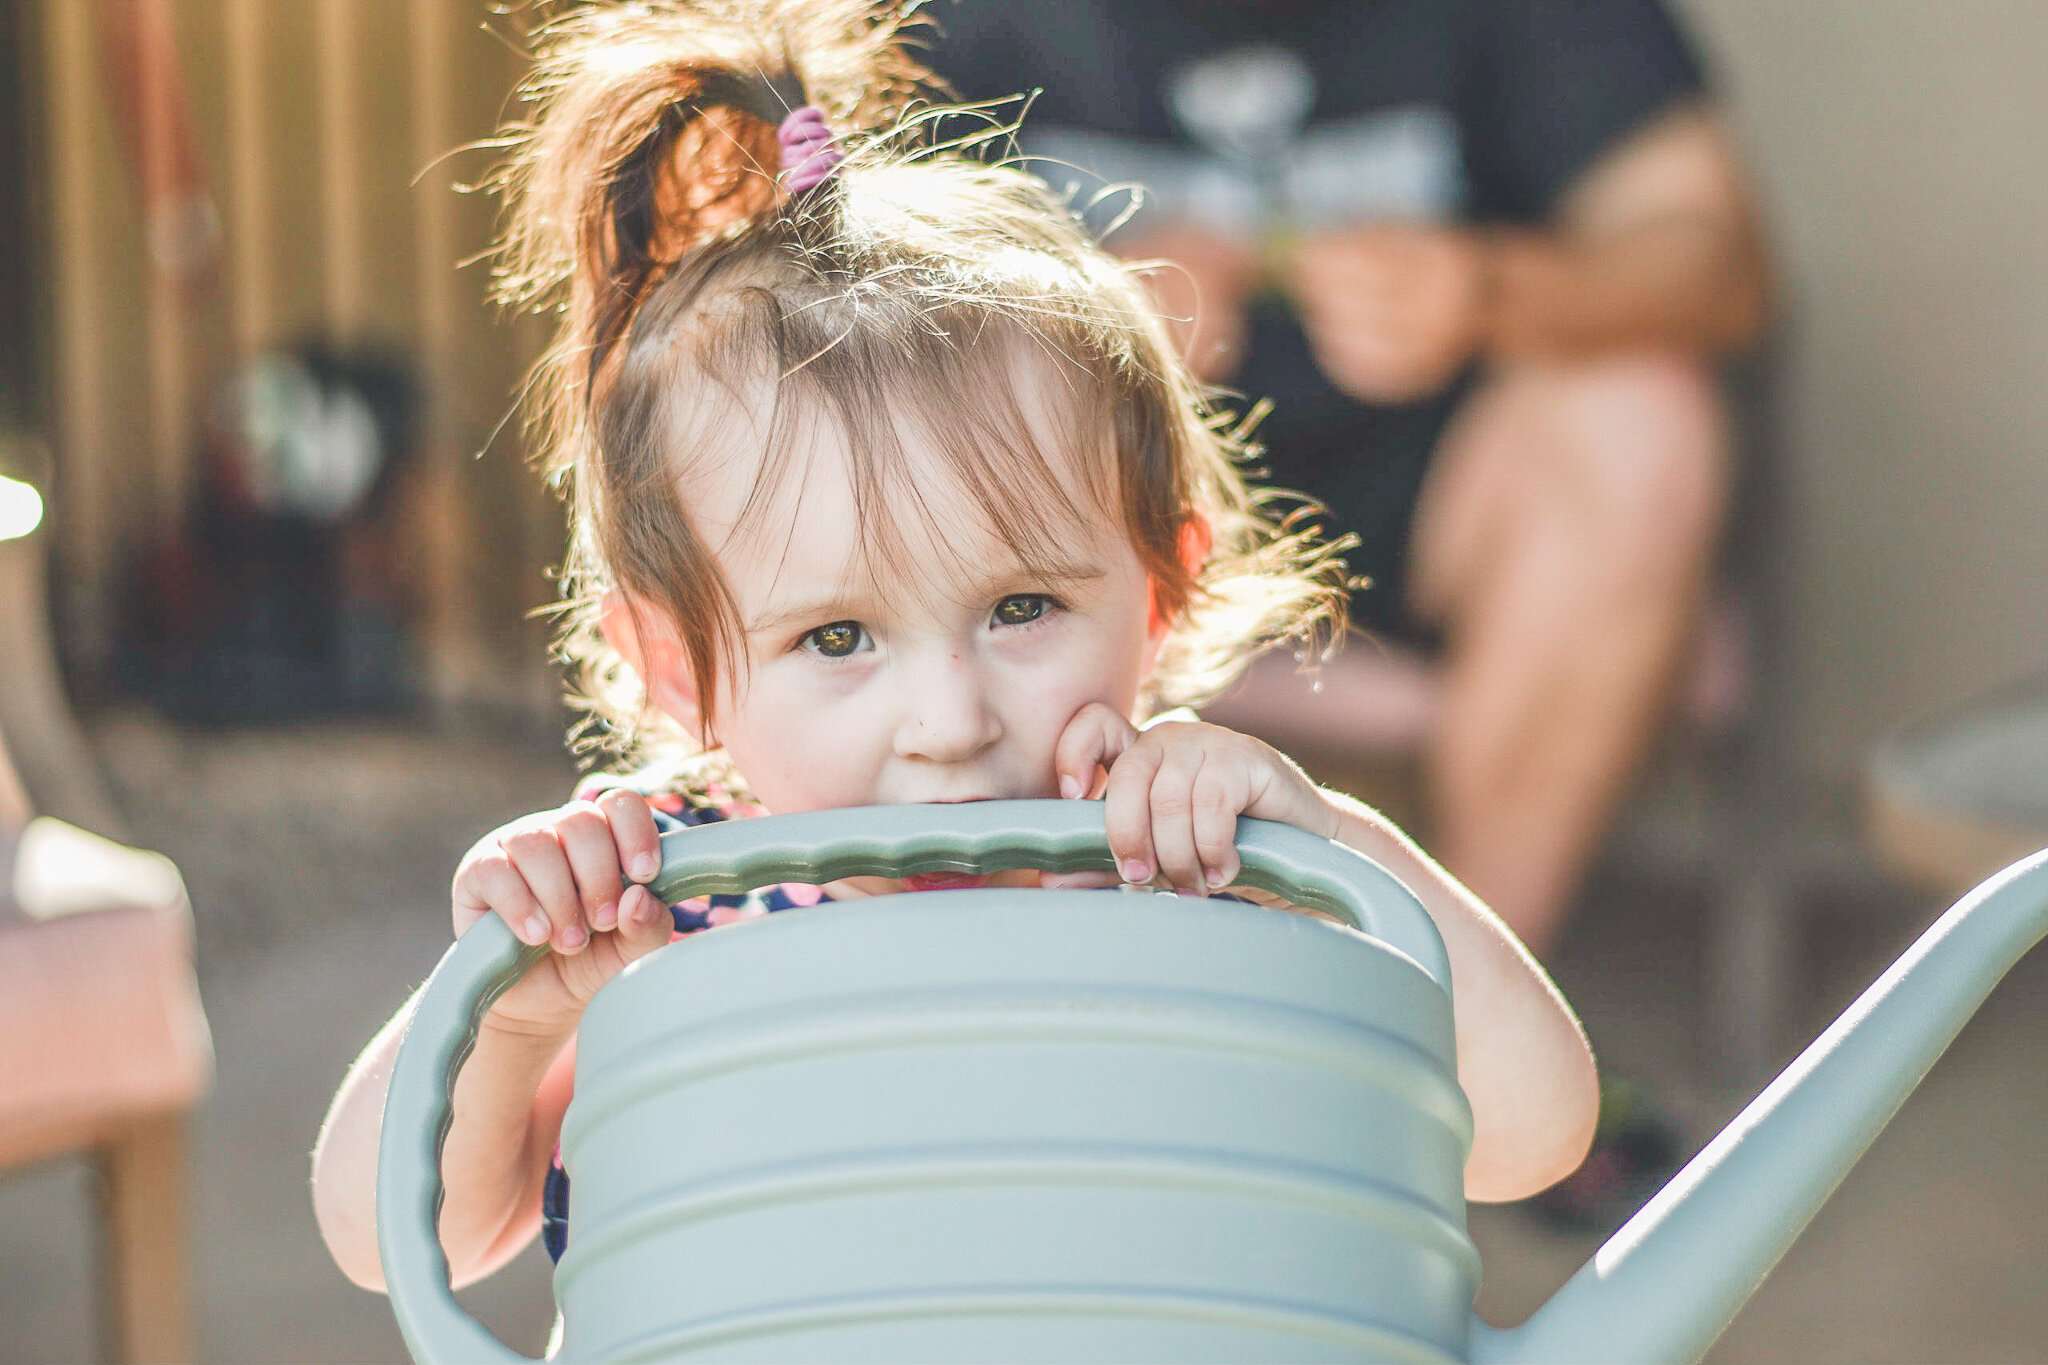 little girl with a messy ponytail staring at the camera while putting a green watering can up to her mouth